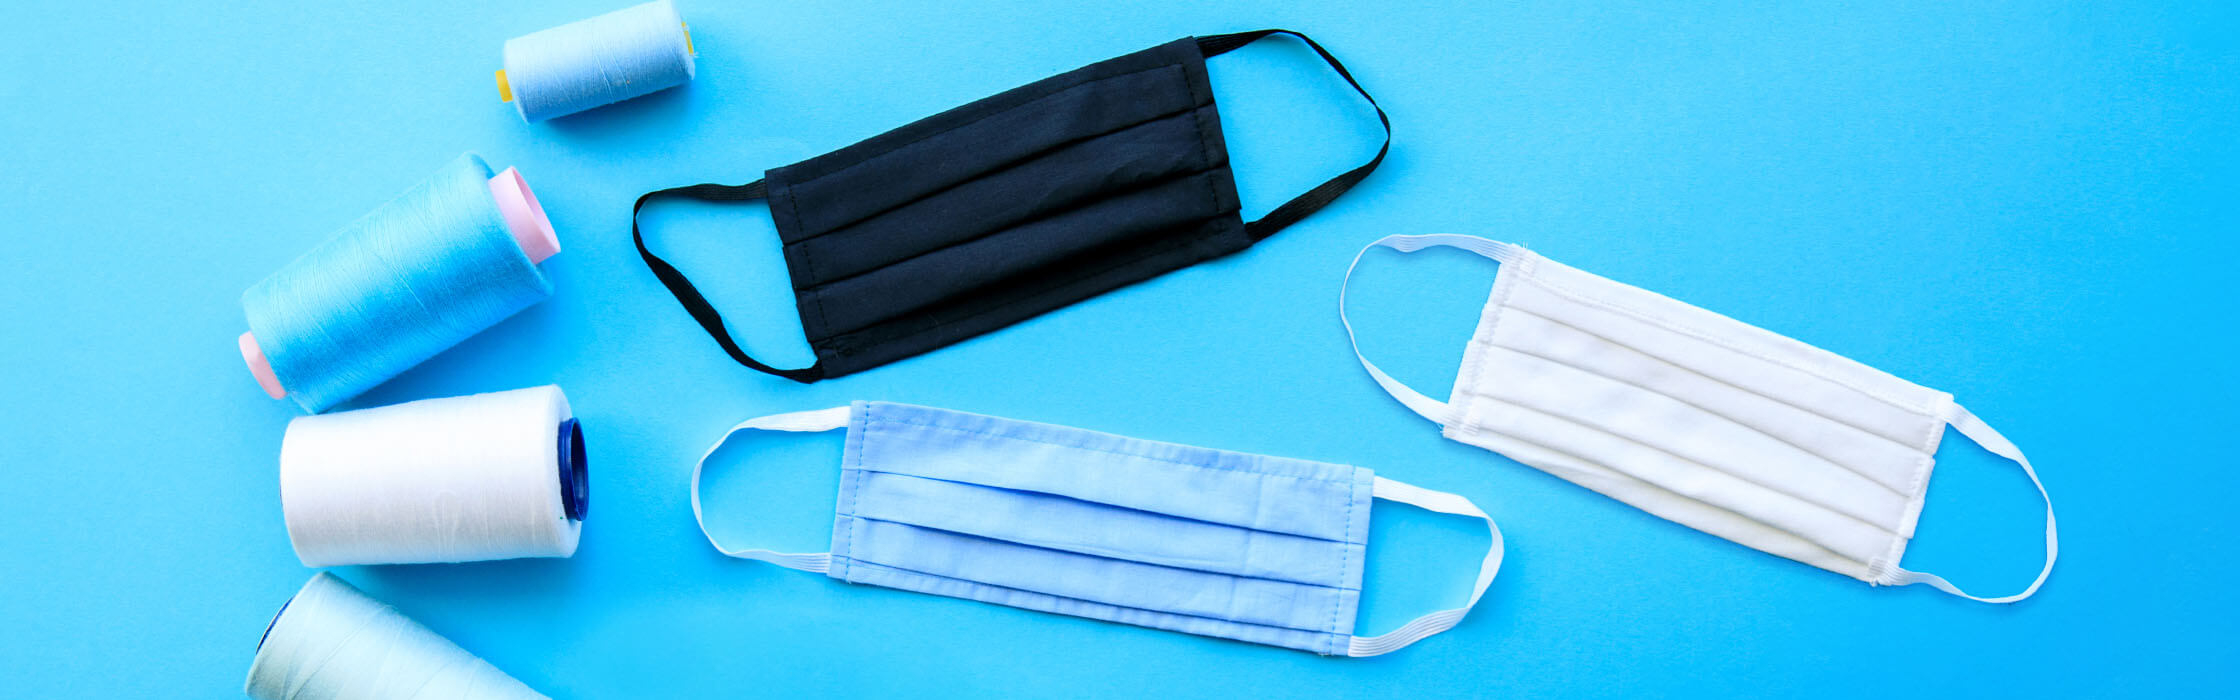 Sewing tools to make a fabric face mask at home